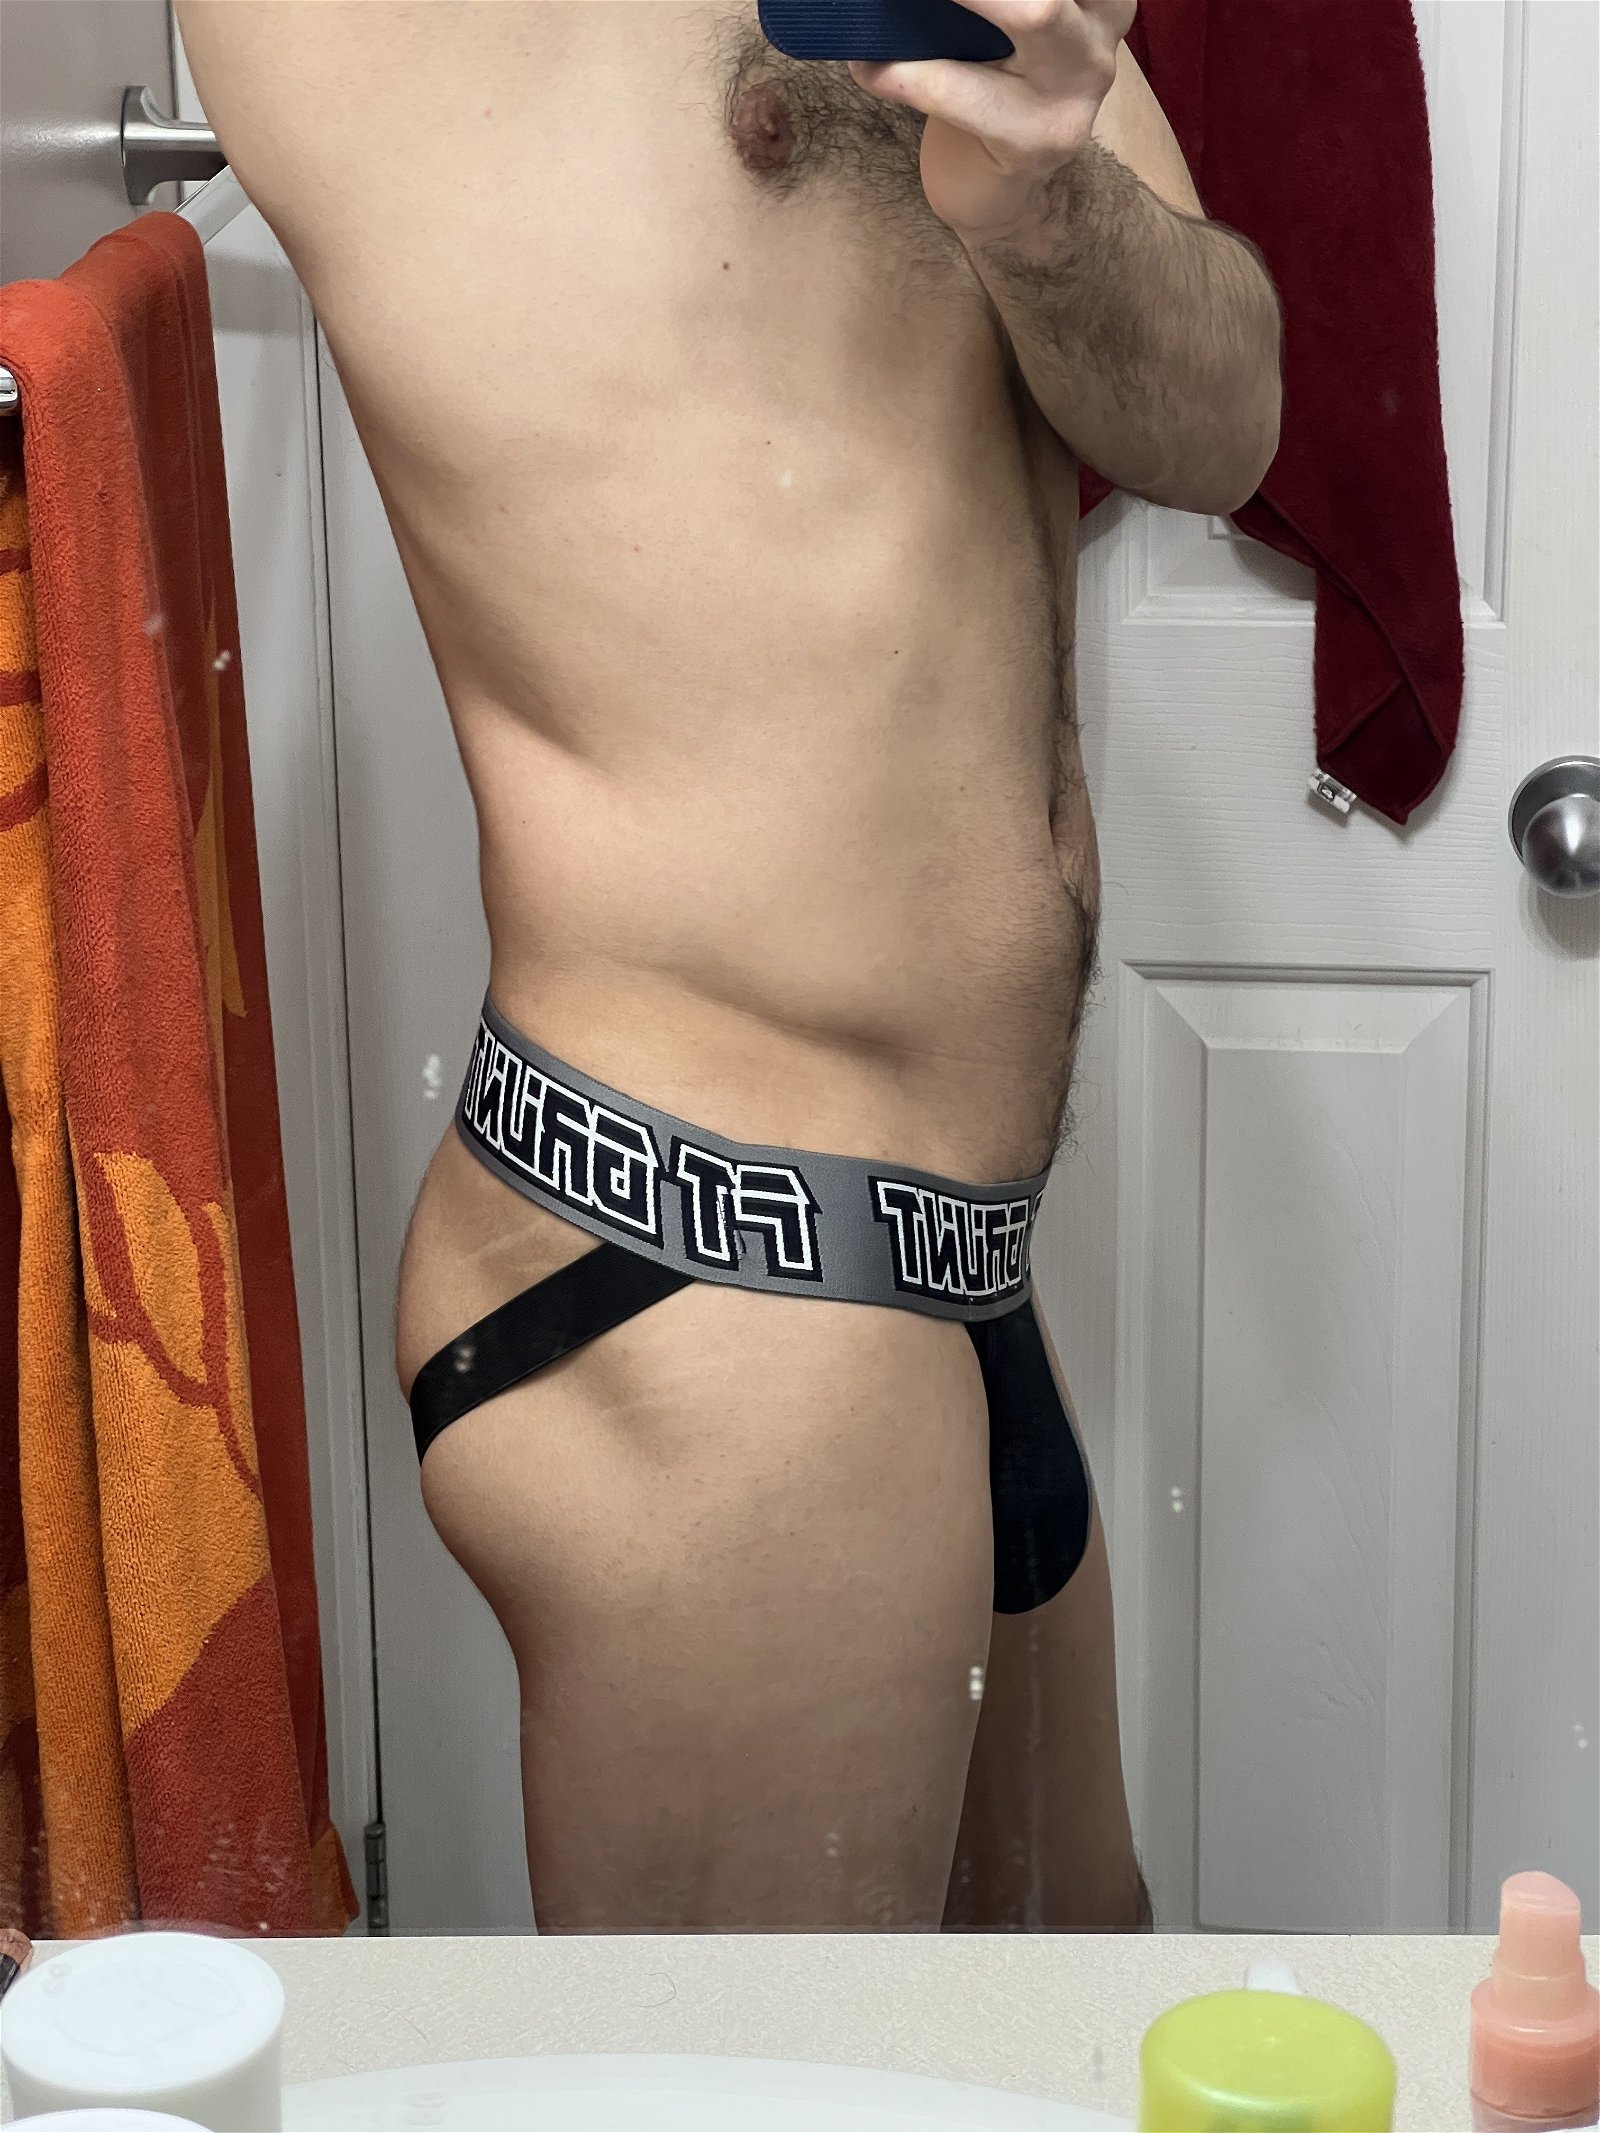 Photo by DPBTM4HungTops with the username @DPBTM4HungTops, who is a verified user,  March 22, 2023 at 5:07 AM. The post is about the topic Guys in Jockstraps and the text says 'Which one do you think looks better? (Red, Blue, Grey) or all of them??? Cause honestly I love them all'